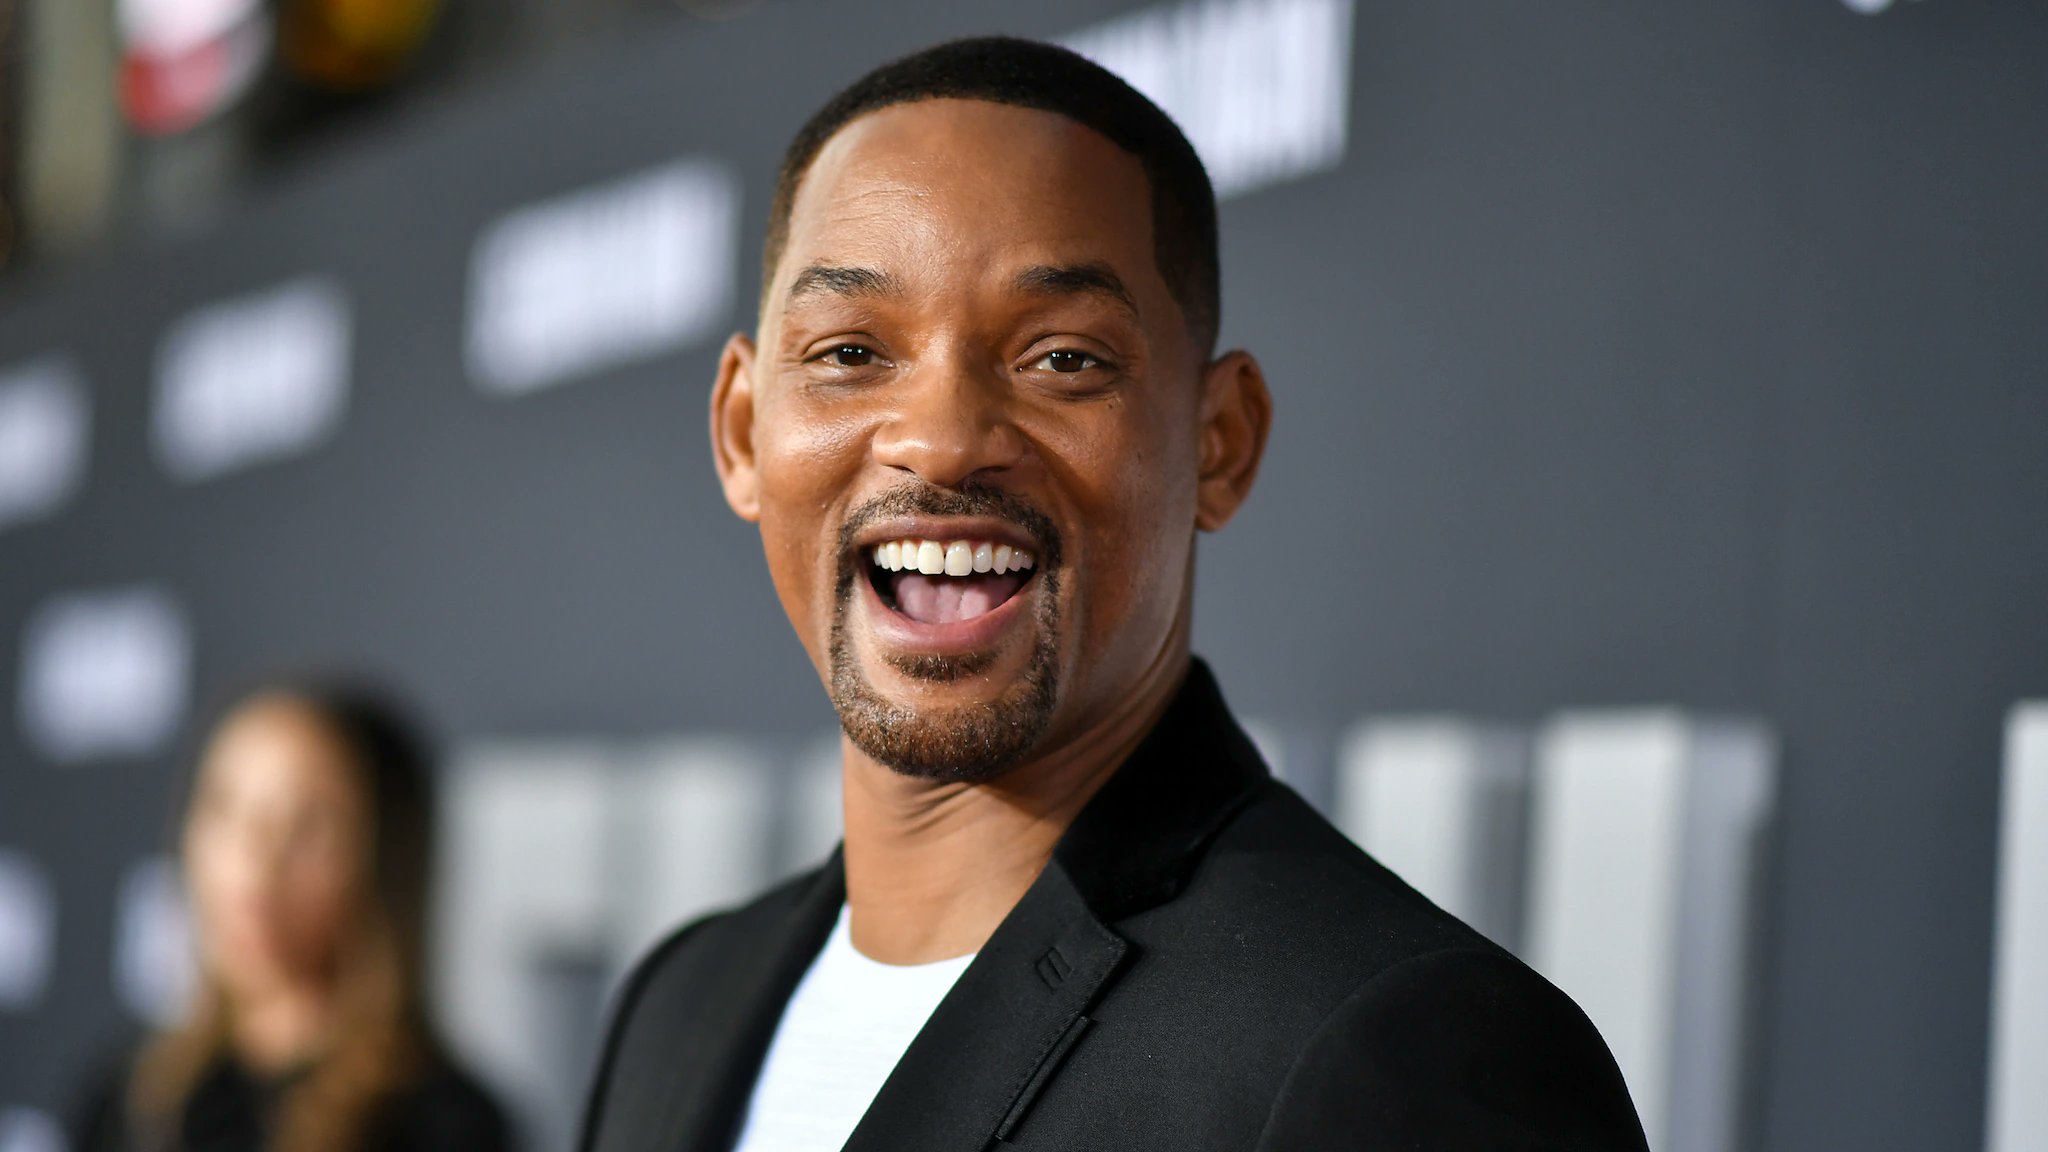 Happy Birthday to Will Smith who turns 53 today! 